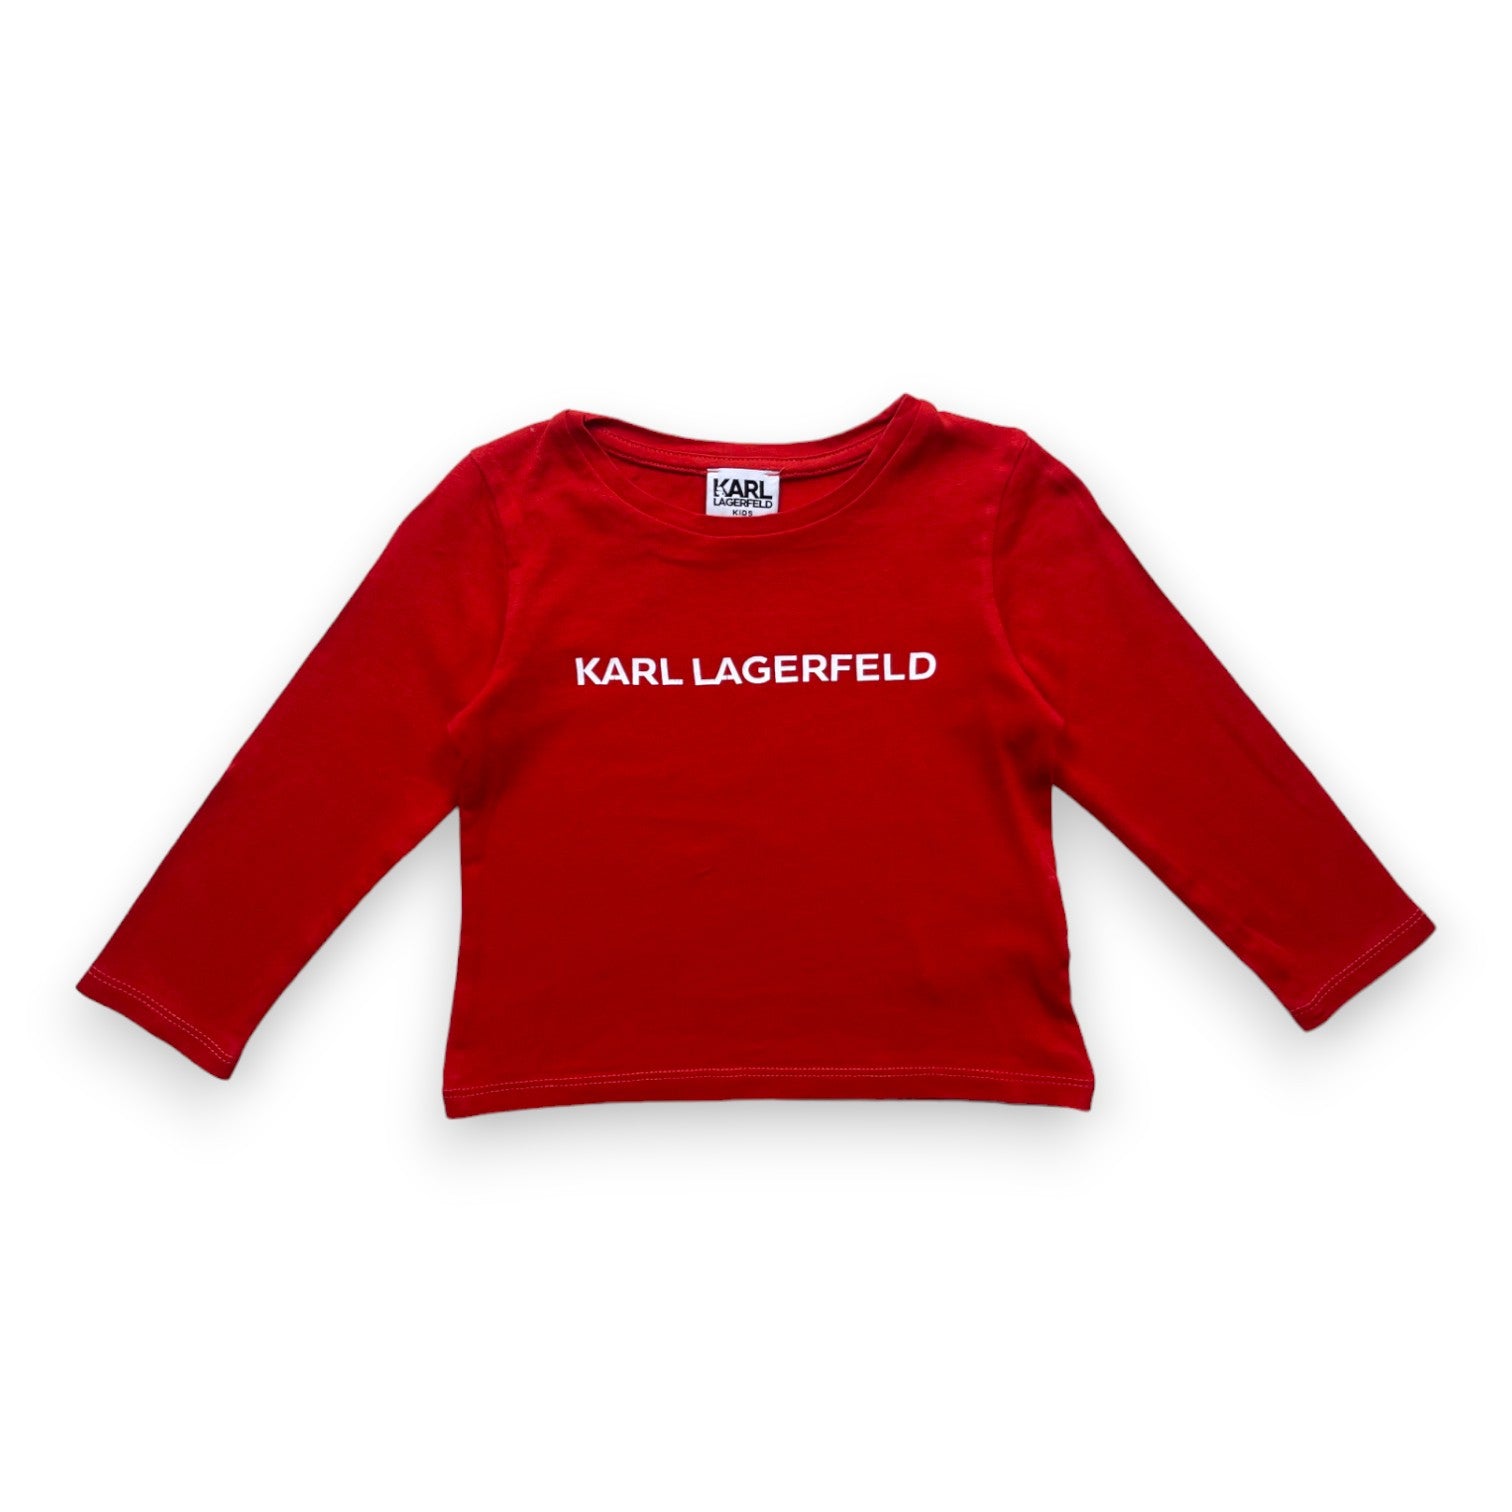 KARL LAGERFELD - T shirt manches longues rouge "Karl Lagerfeld" - 2 ans